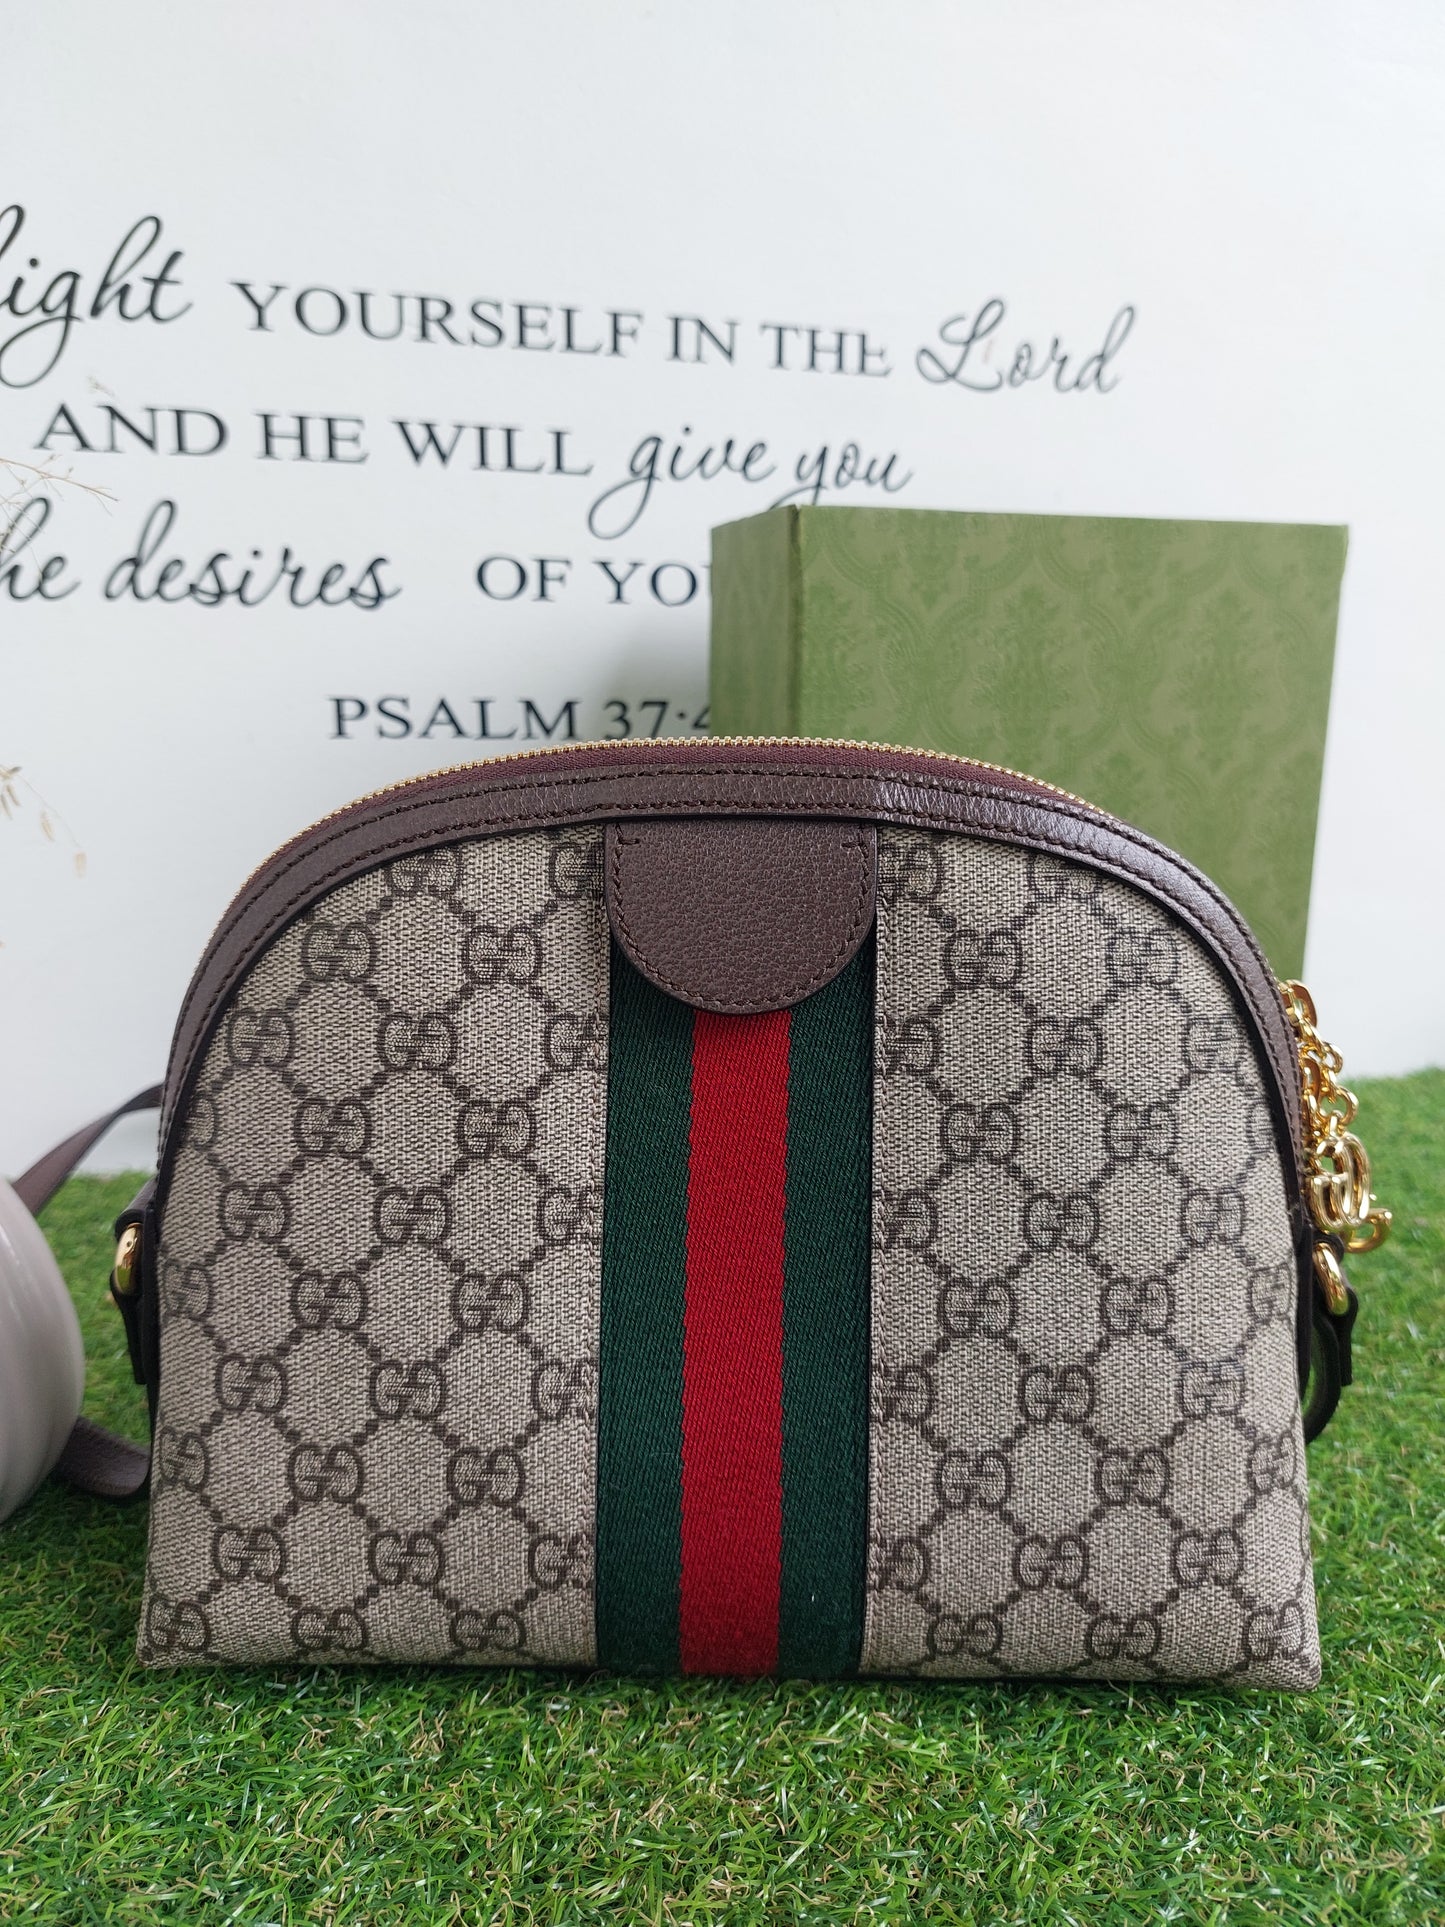 Gucci Ophidia GG Dome Sling